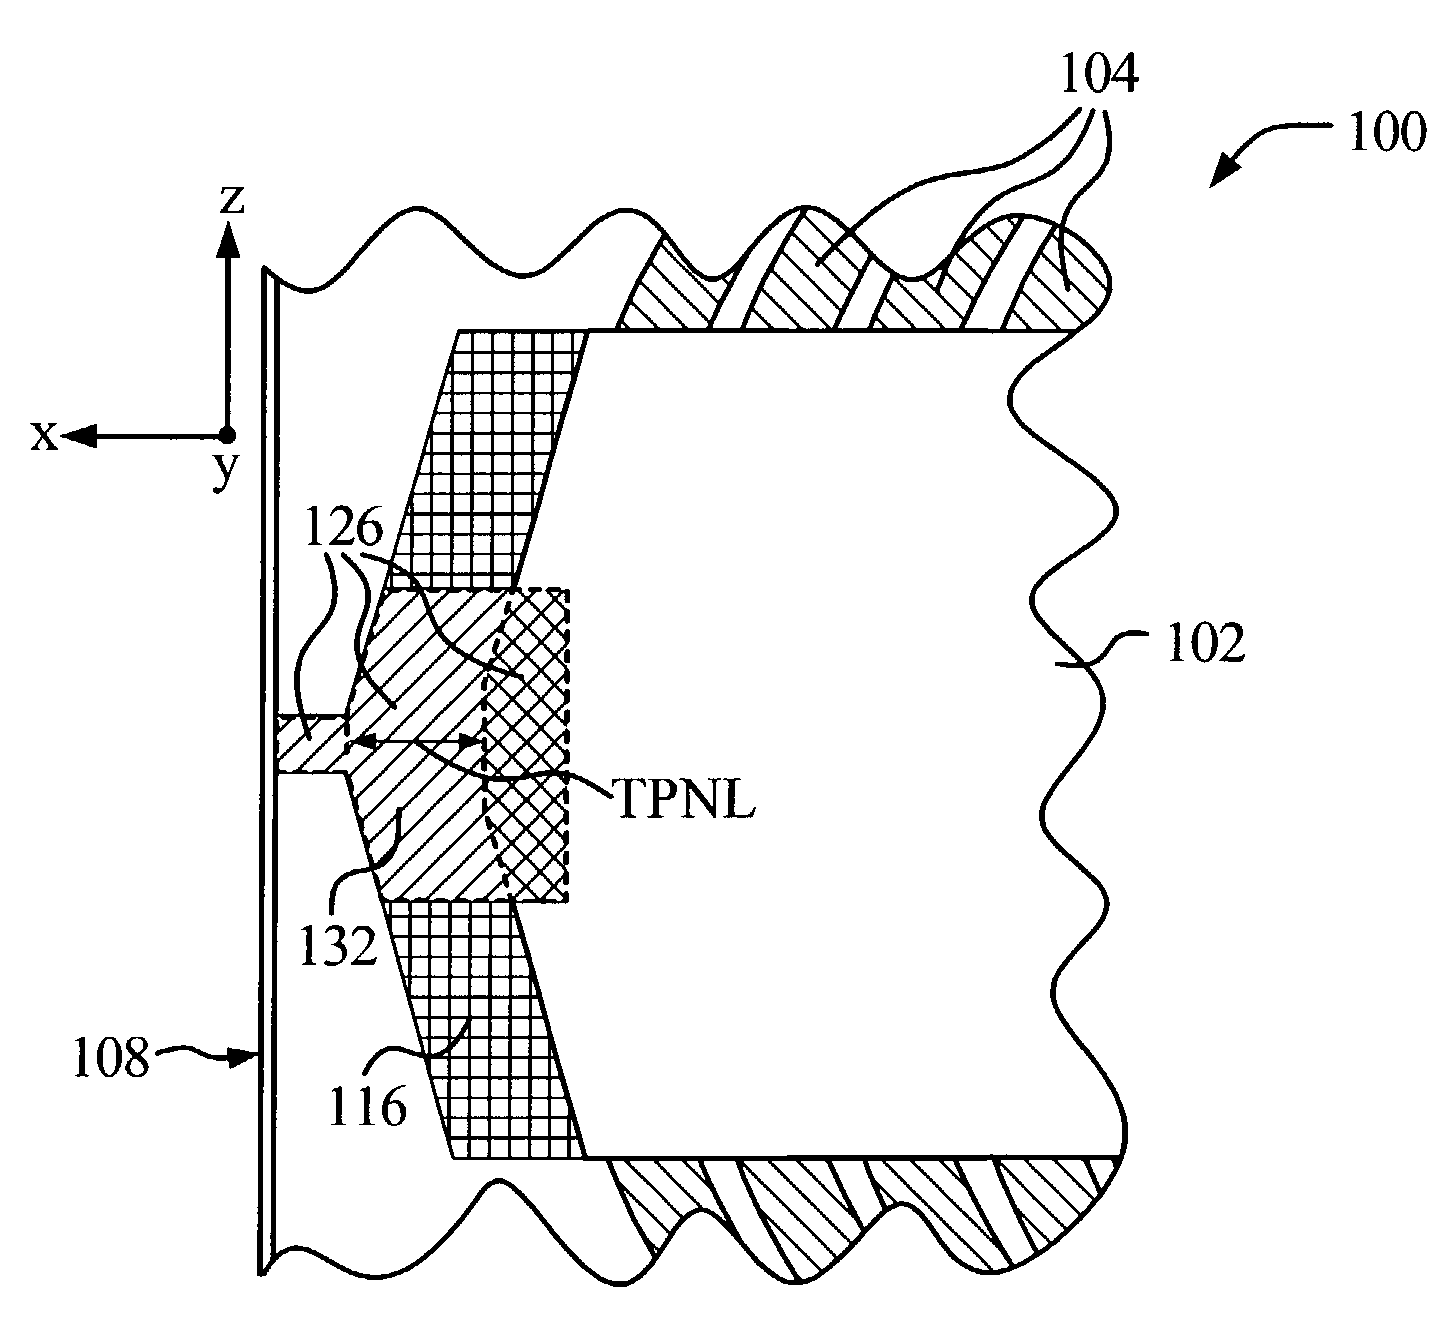 Double-nosed inductive transducer with reduced off-track writing